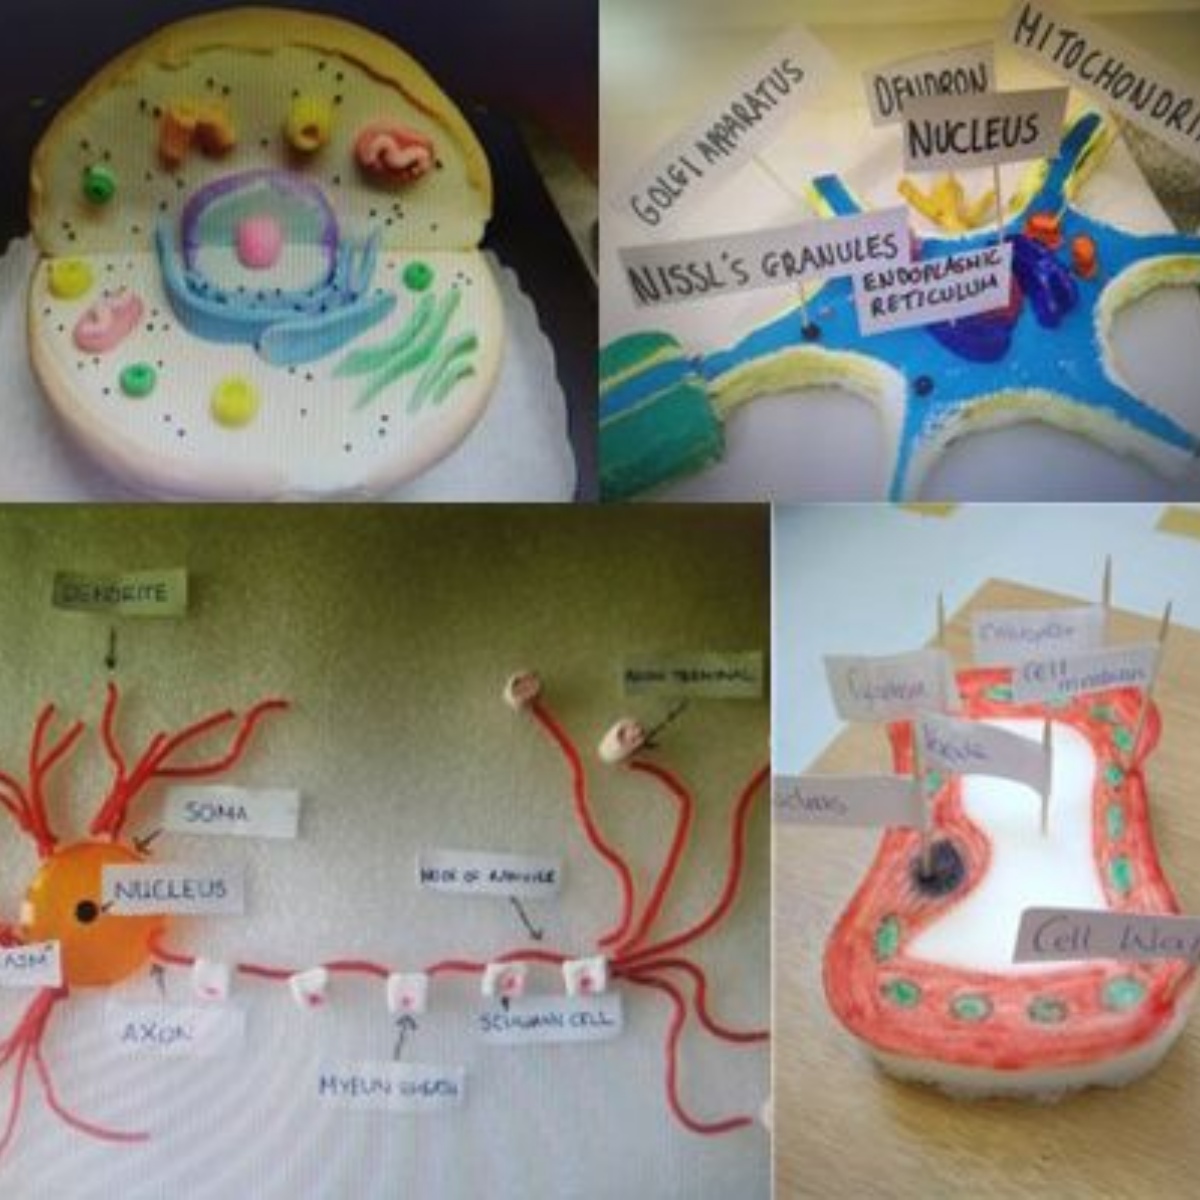 Manor High School - Year 7 create specialised cell models